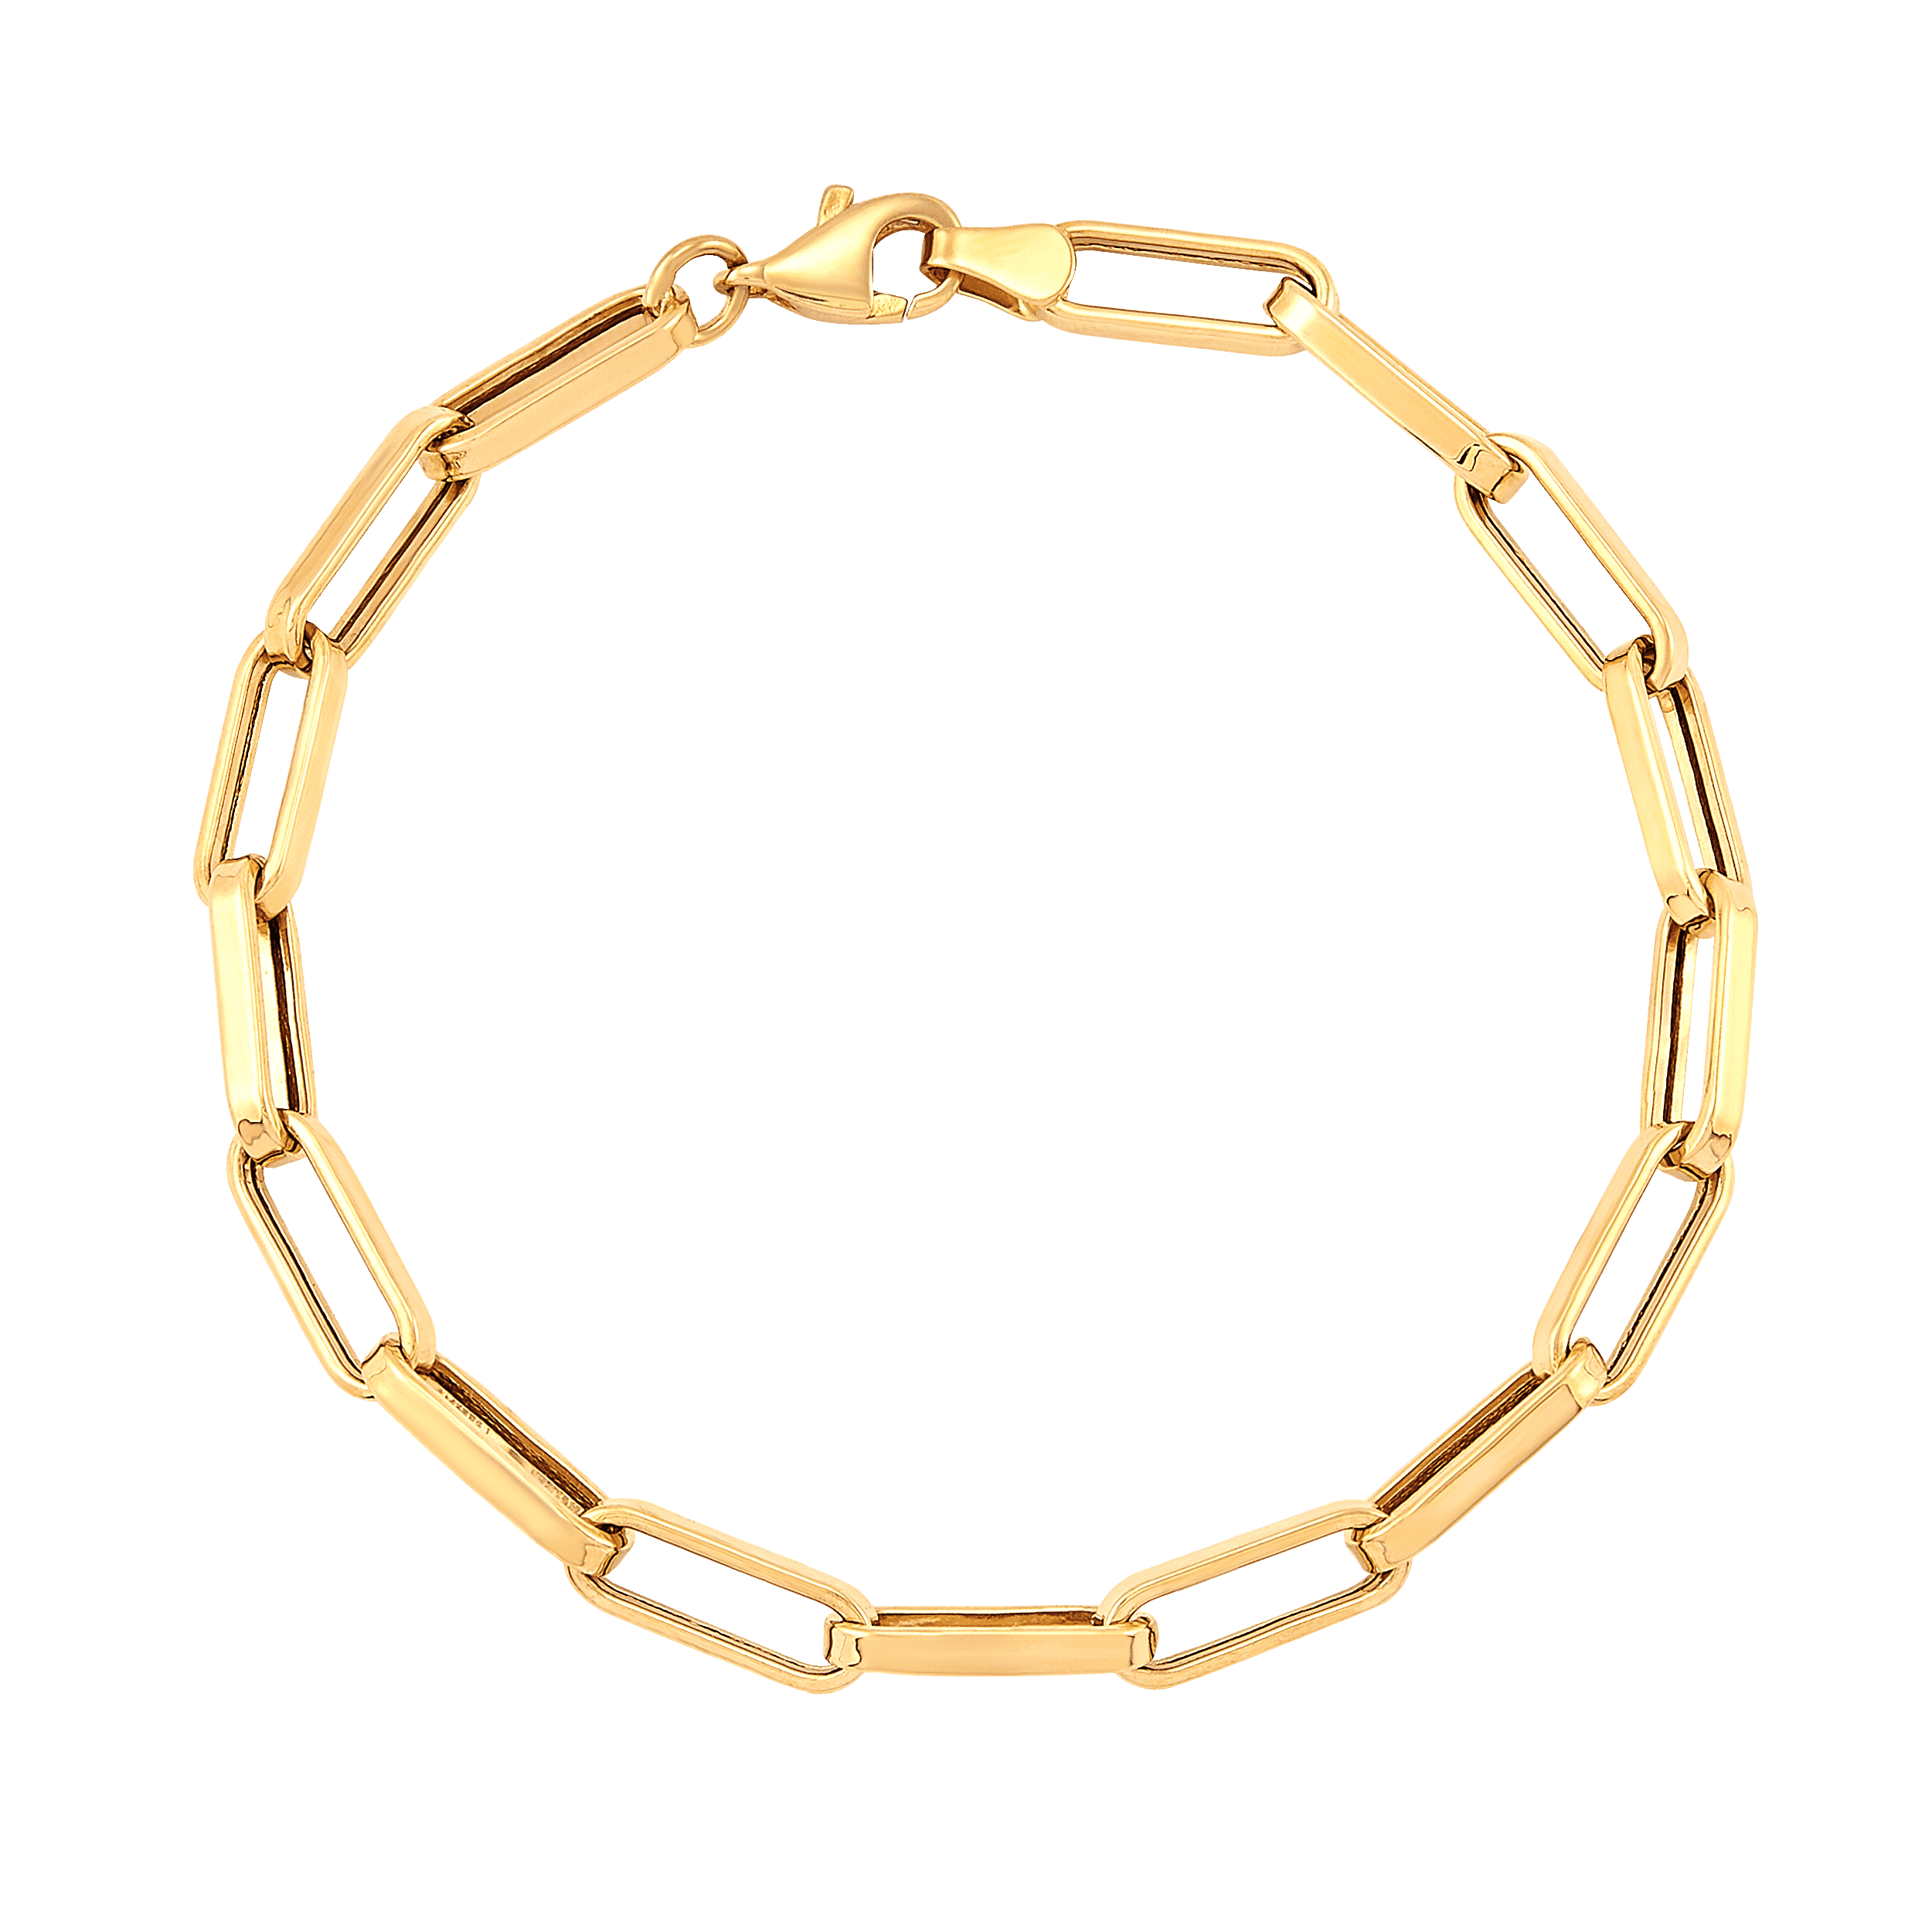 Pre-owned Welry Paperclip Chain Link Bracelet In 14k Yellow Gold, 7.5"